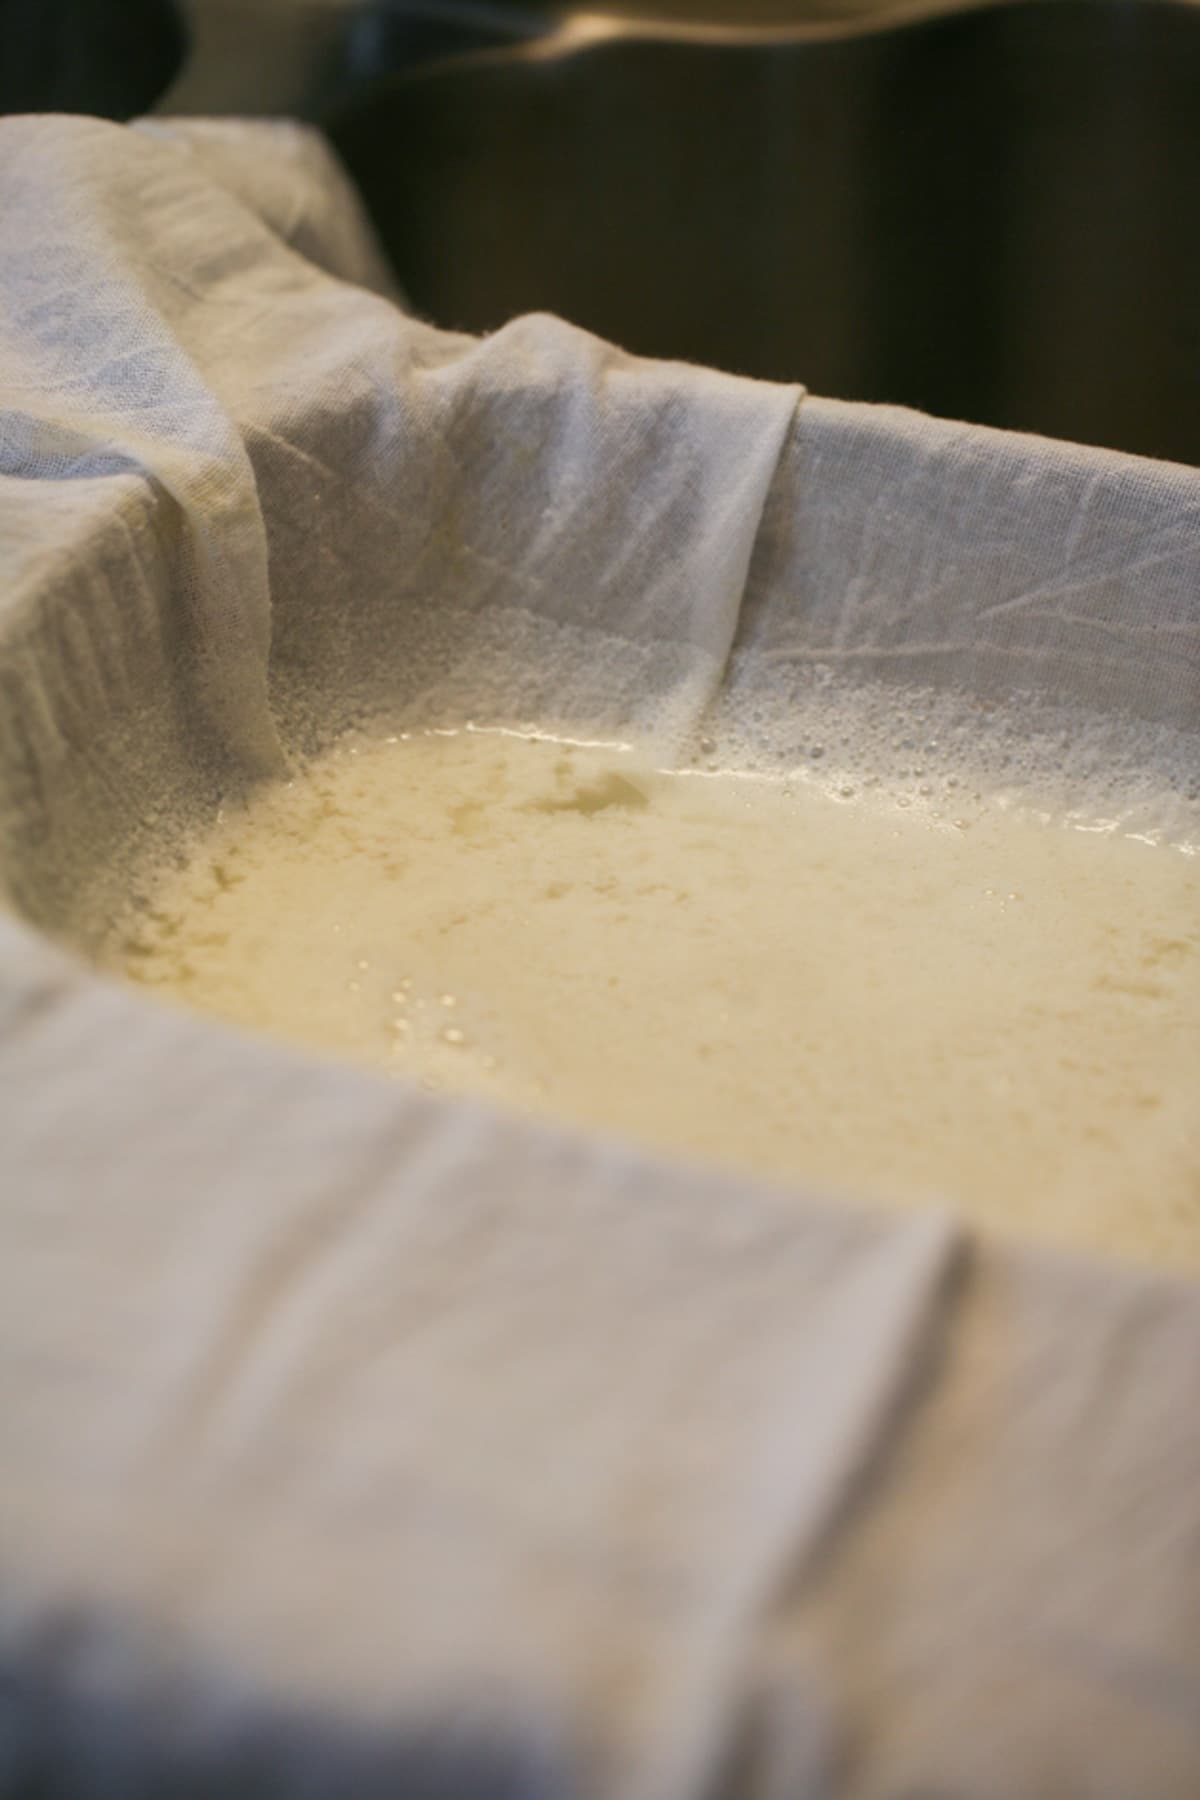 adding the curdled whey to the flour sack